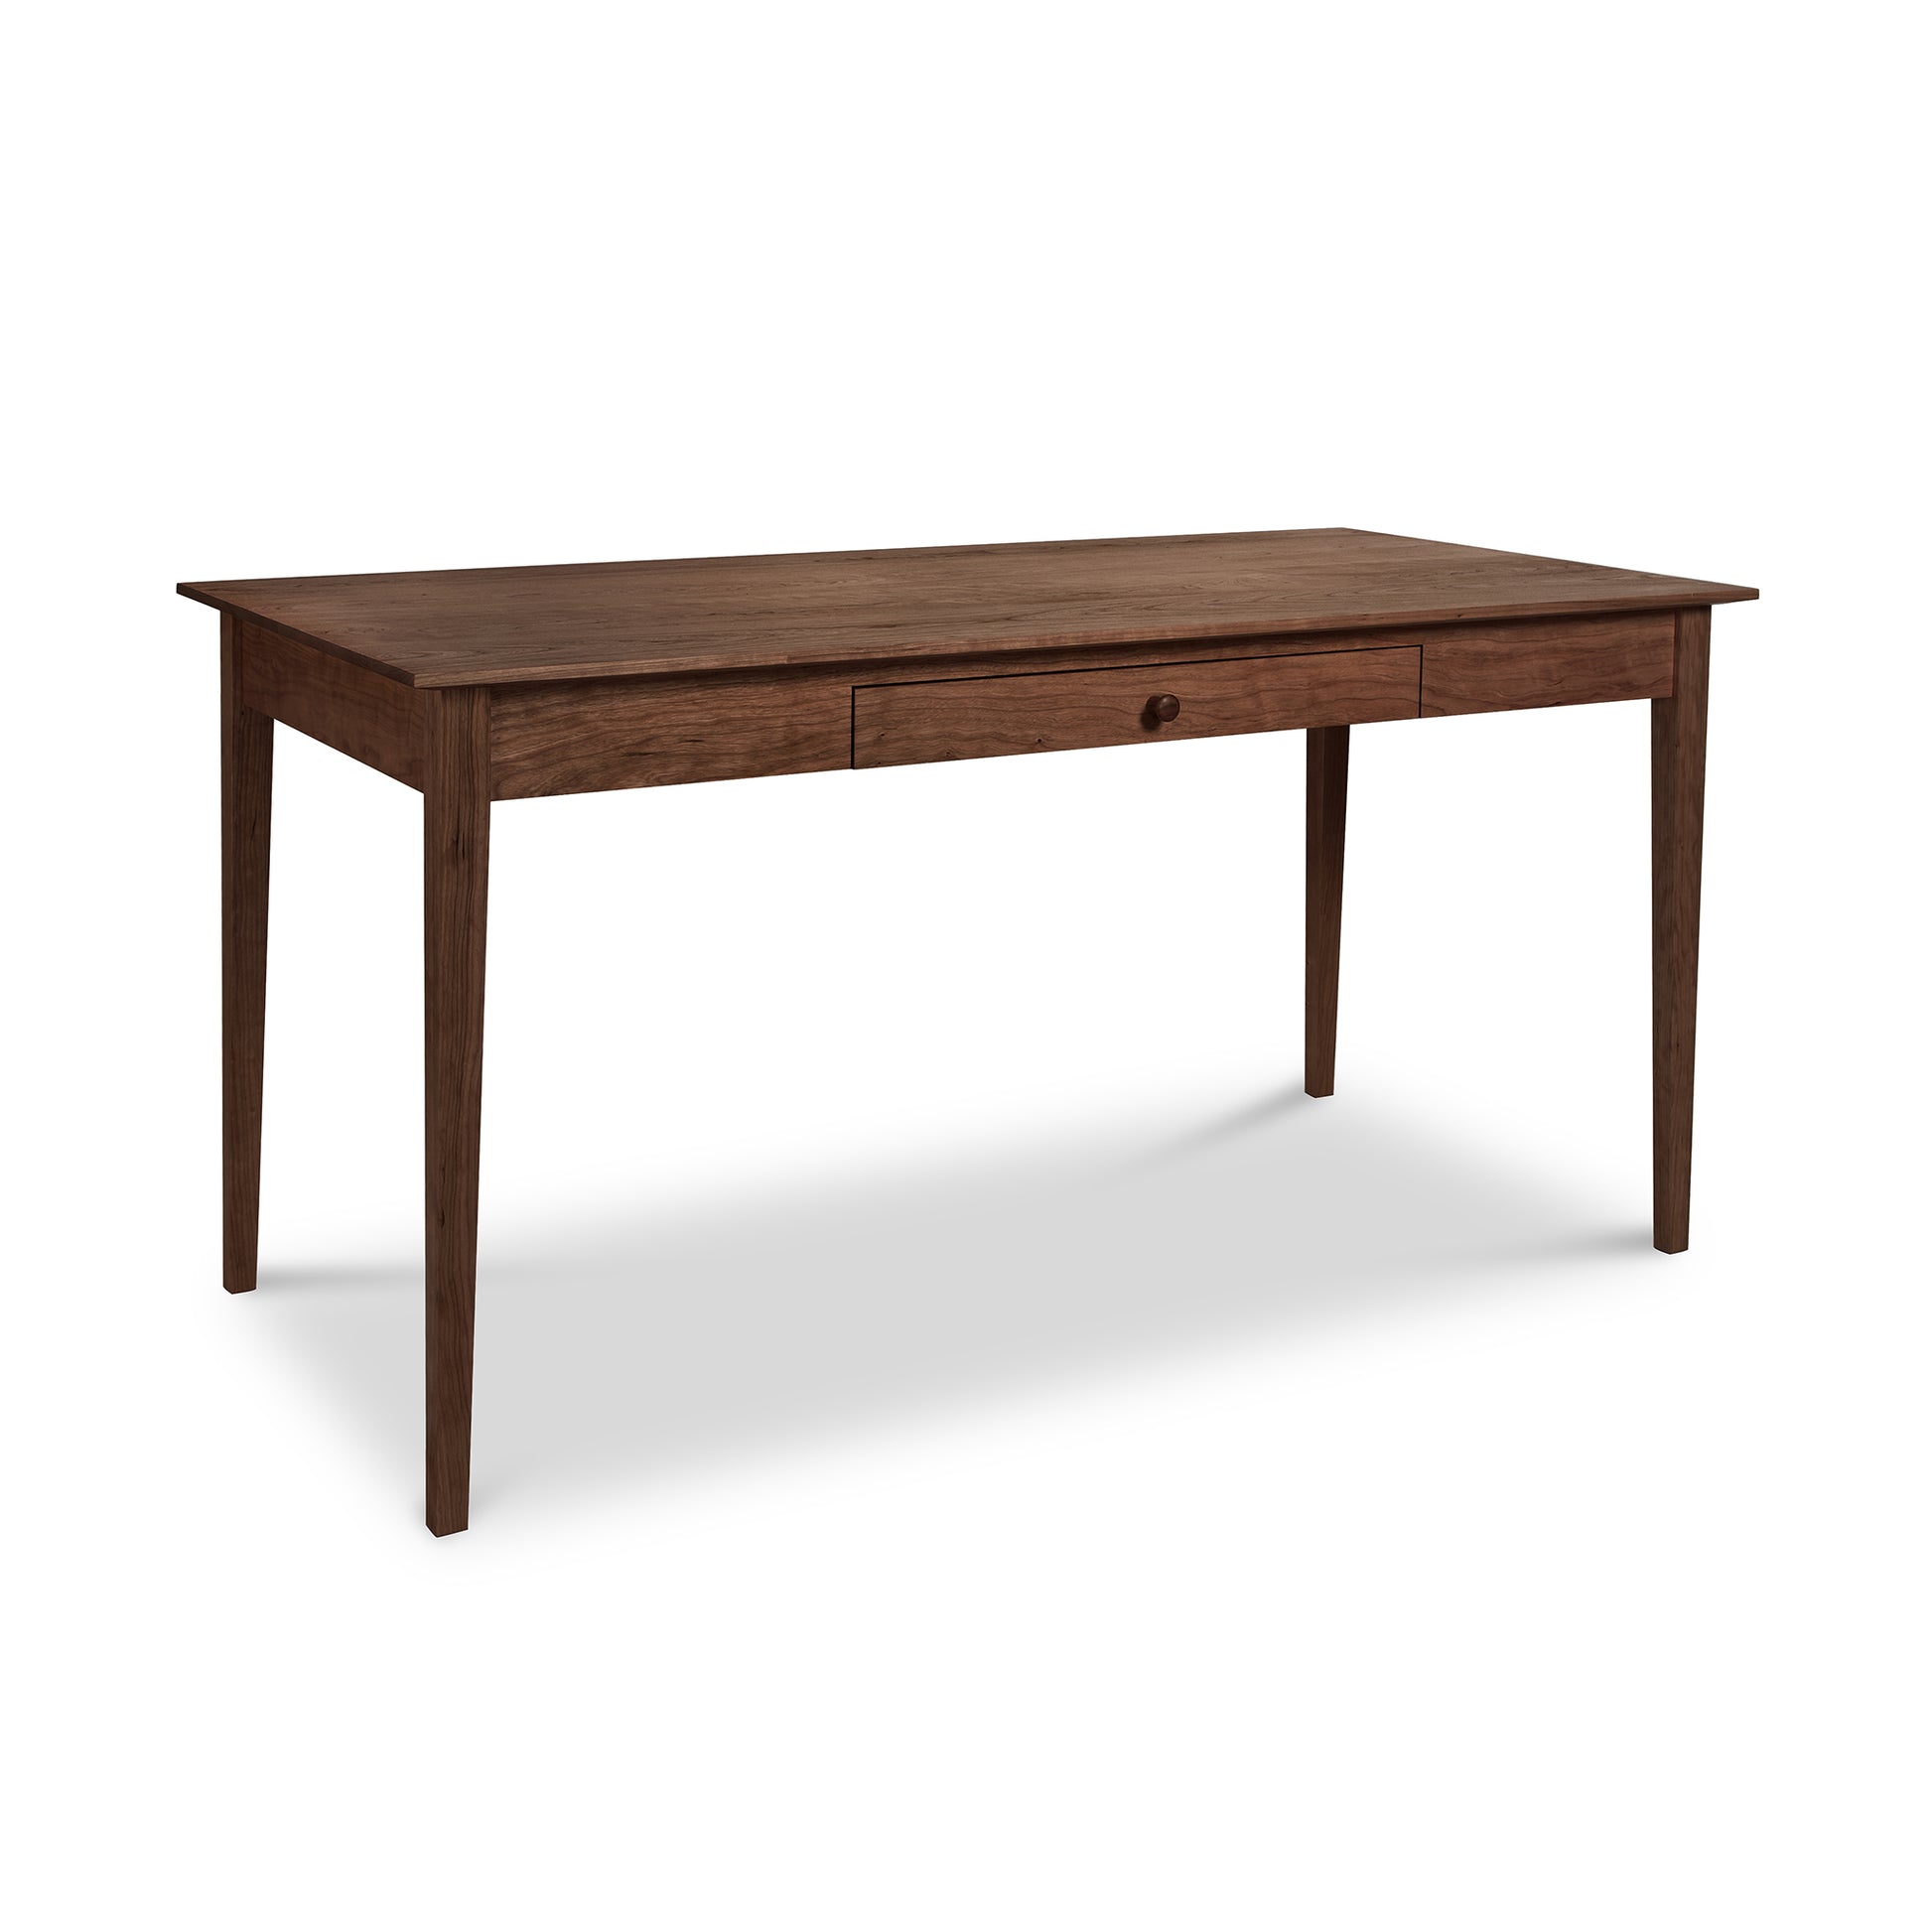 A natural cherry wooden American Shaker Writing Desk from Vermont with two drawers, crafted by Maple Corner Woodworks.